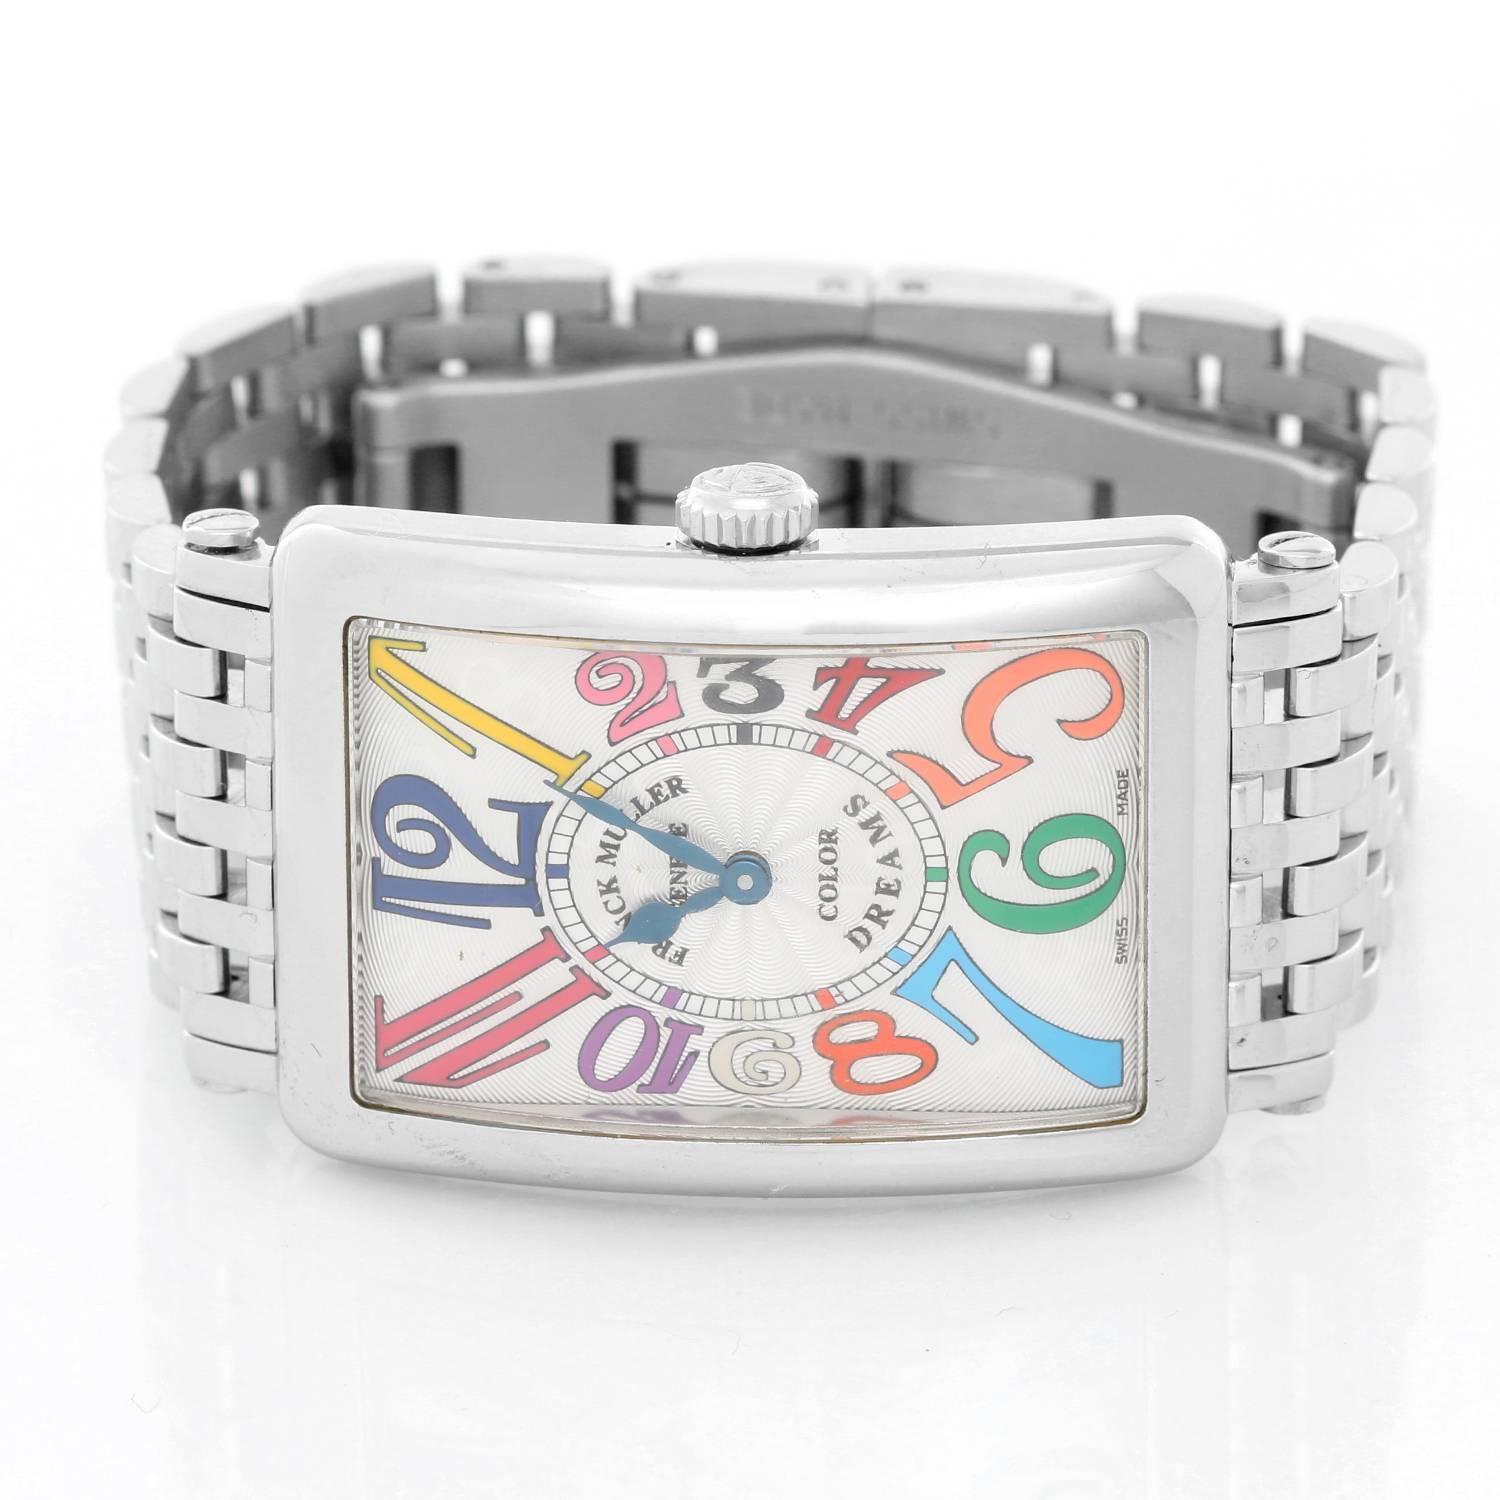 Automatic winding. Stainless steel case (26mm X 36mm). Silvered guilloche dial with multi color Arabic numerals. Stainless steel Franck Muller bracelet. Pre-owned with custom box. Wrist size 5 1/2 inches 